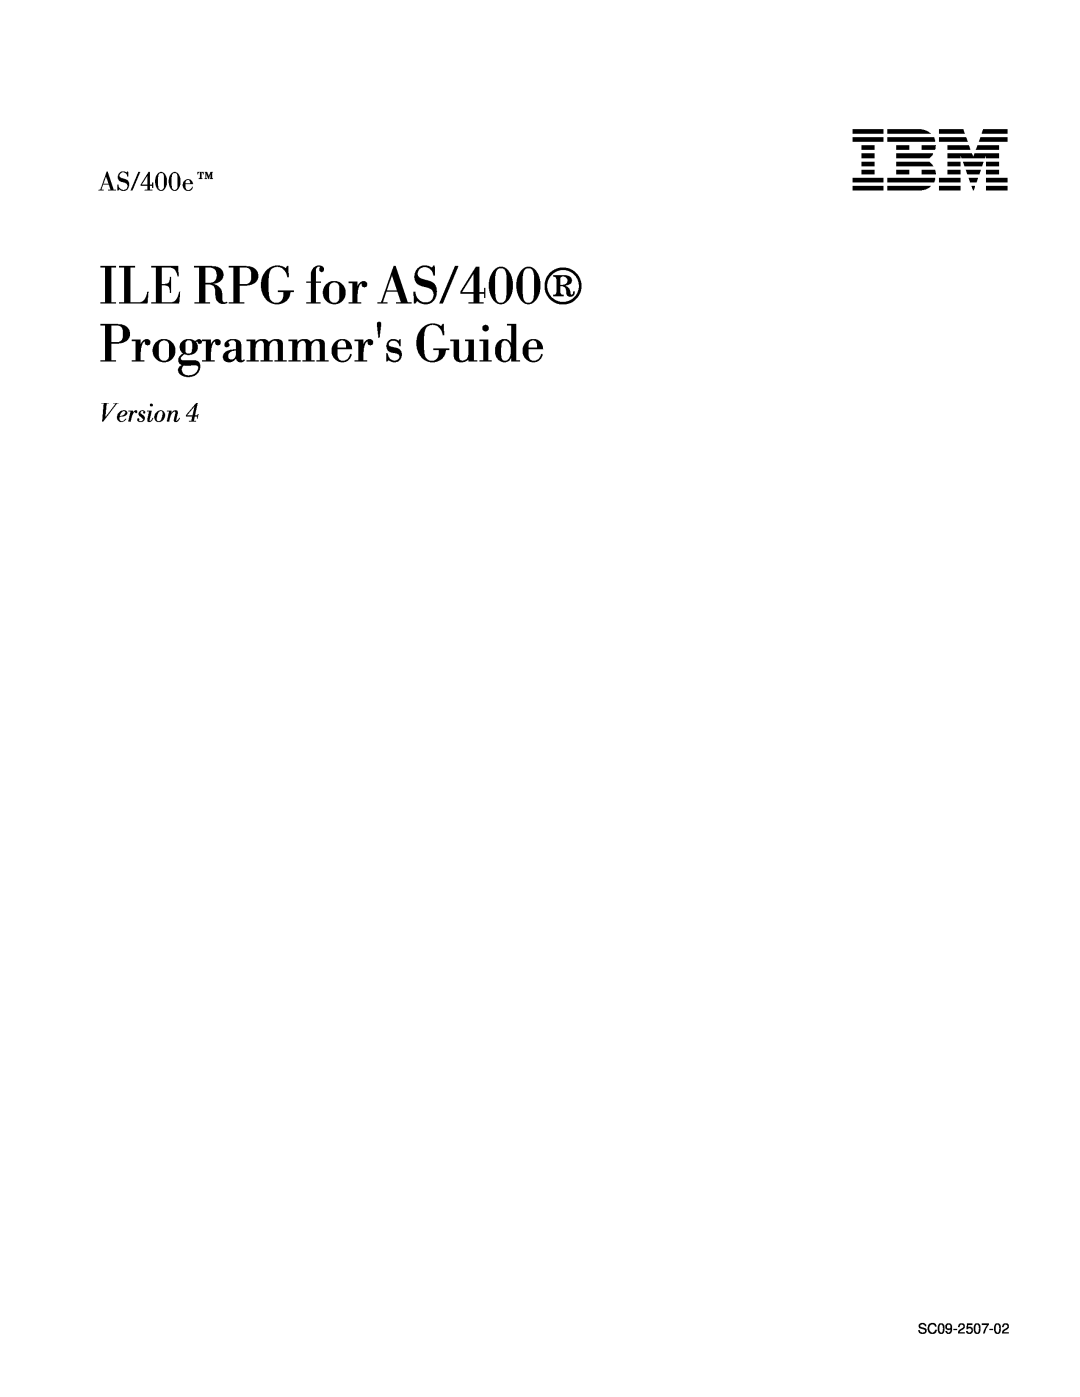 IBM AS/400 manual ERserver, Networking iSeries Communications Management 